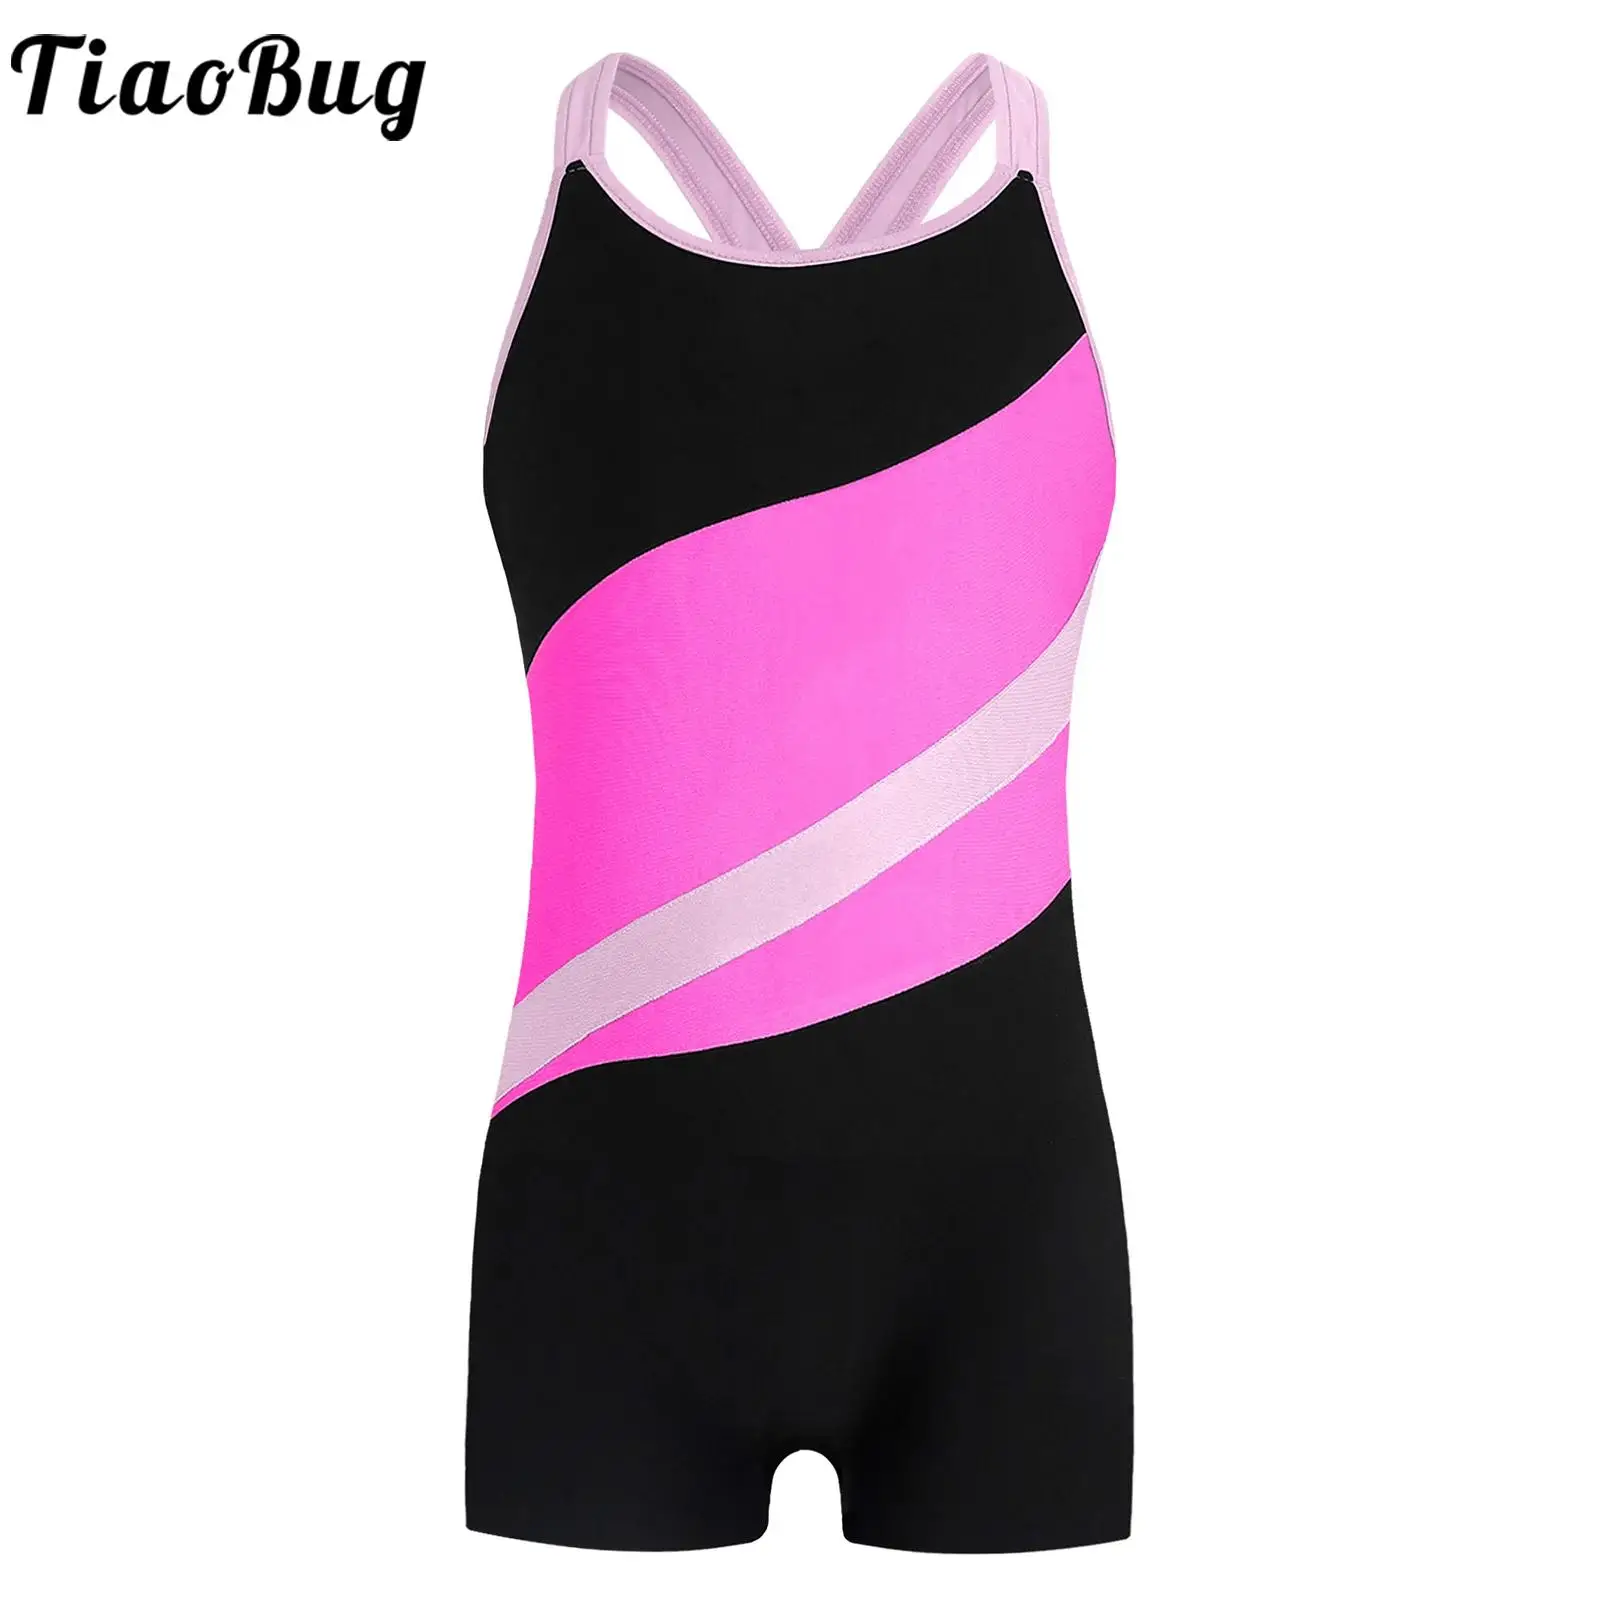 

Kids Girl One-piece Athletic Swimsuit Quickly-dry Swimwear Sleeveless Hollow Back Color Block Water Sport for Beach Bathing Suit